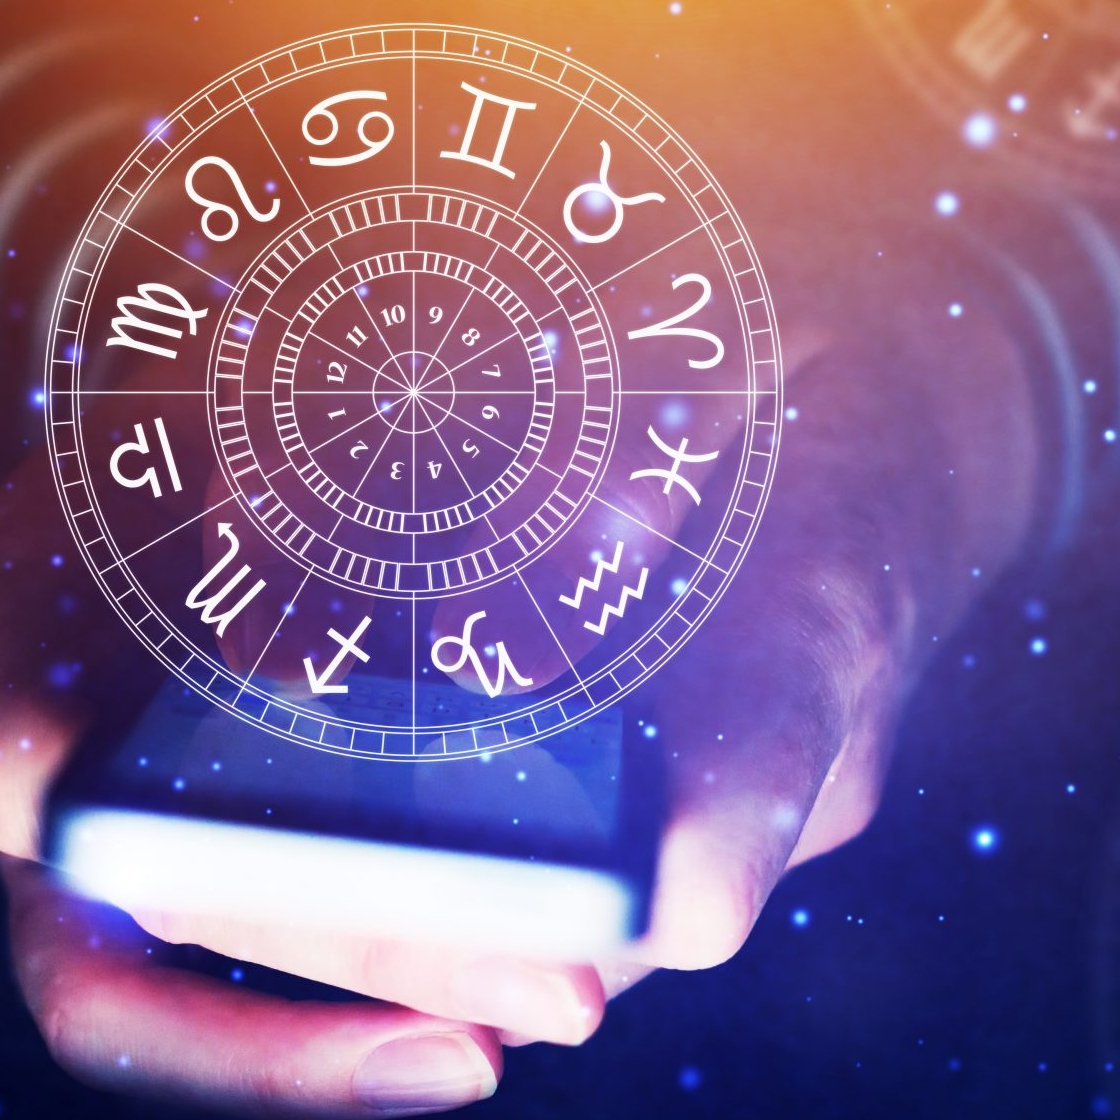 Zodiac signs shift 2023: new star signs impact your horoscope